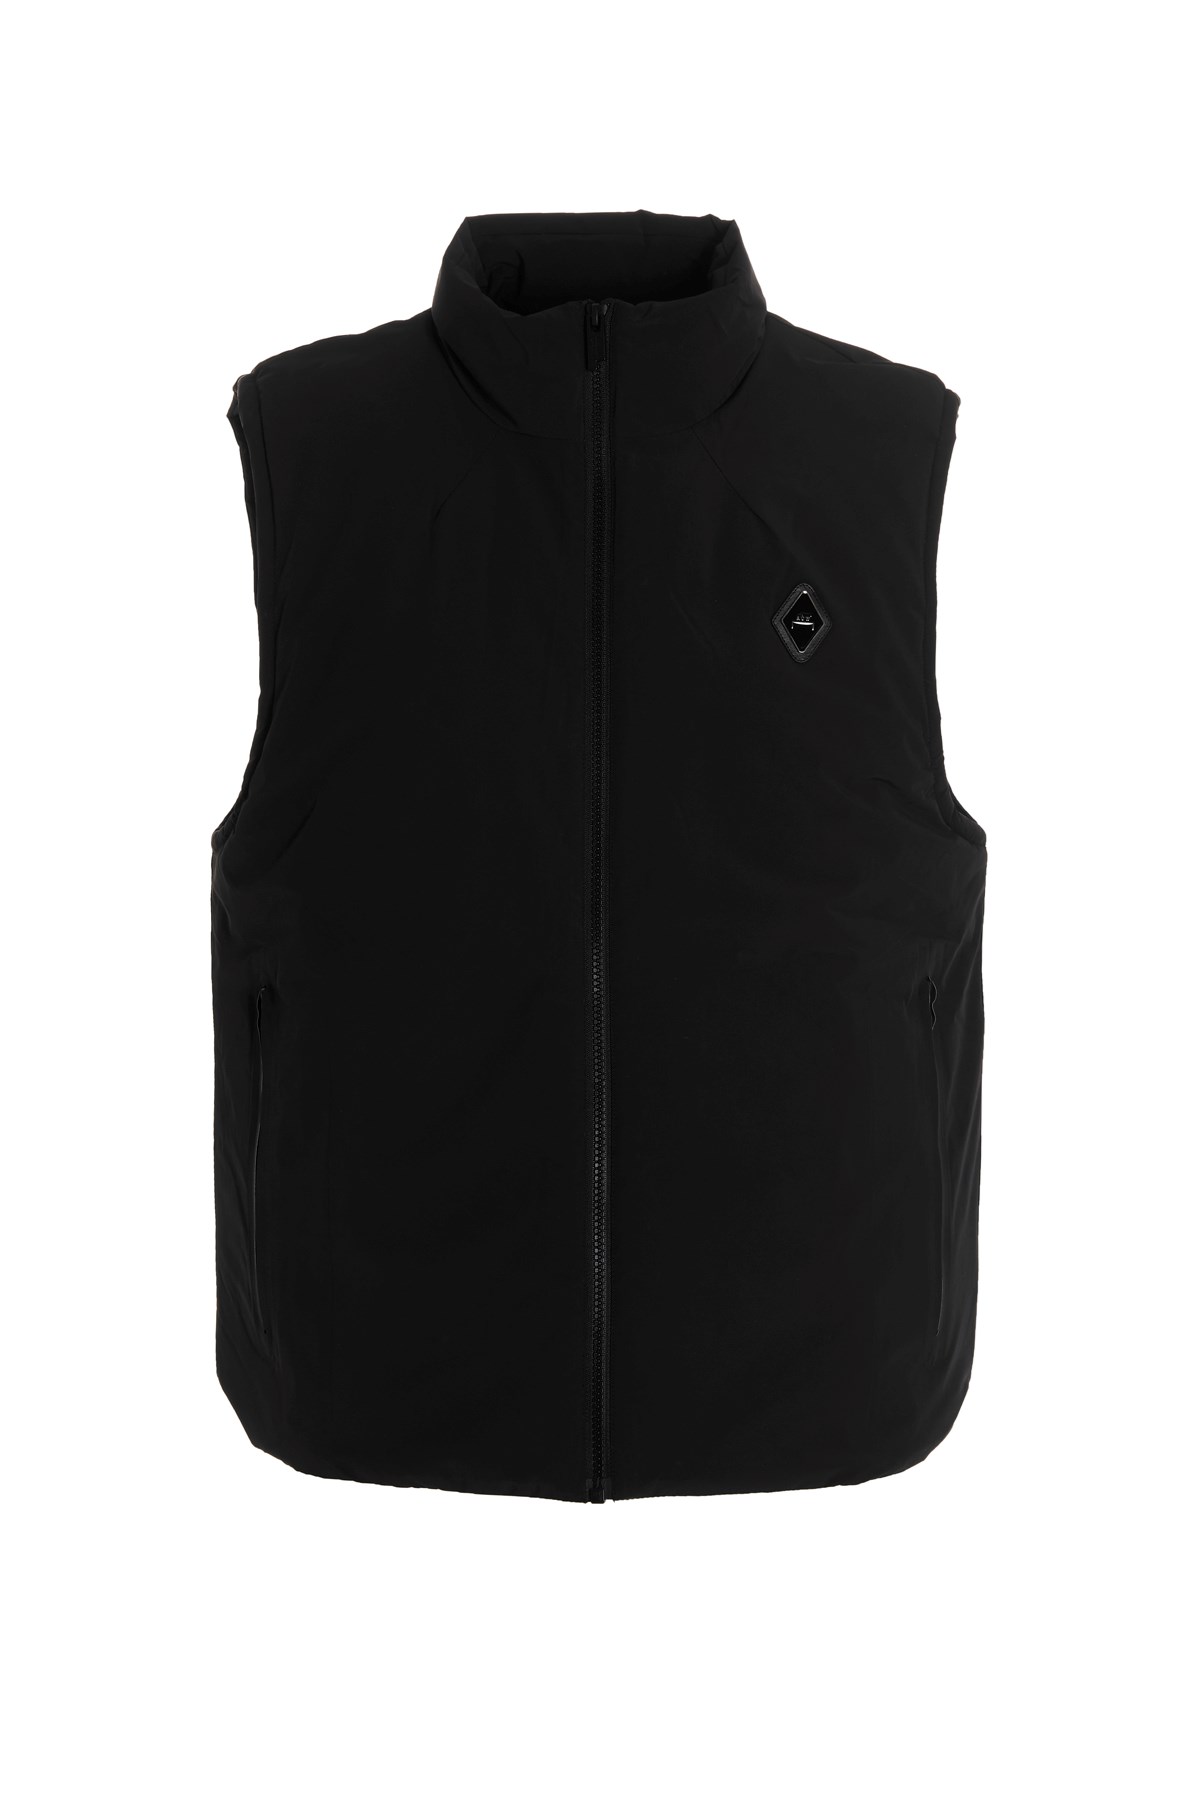 A-COLD-WALL* Gepolsterte Gilet